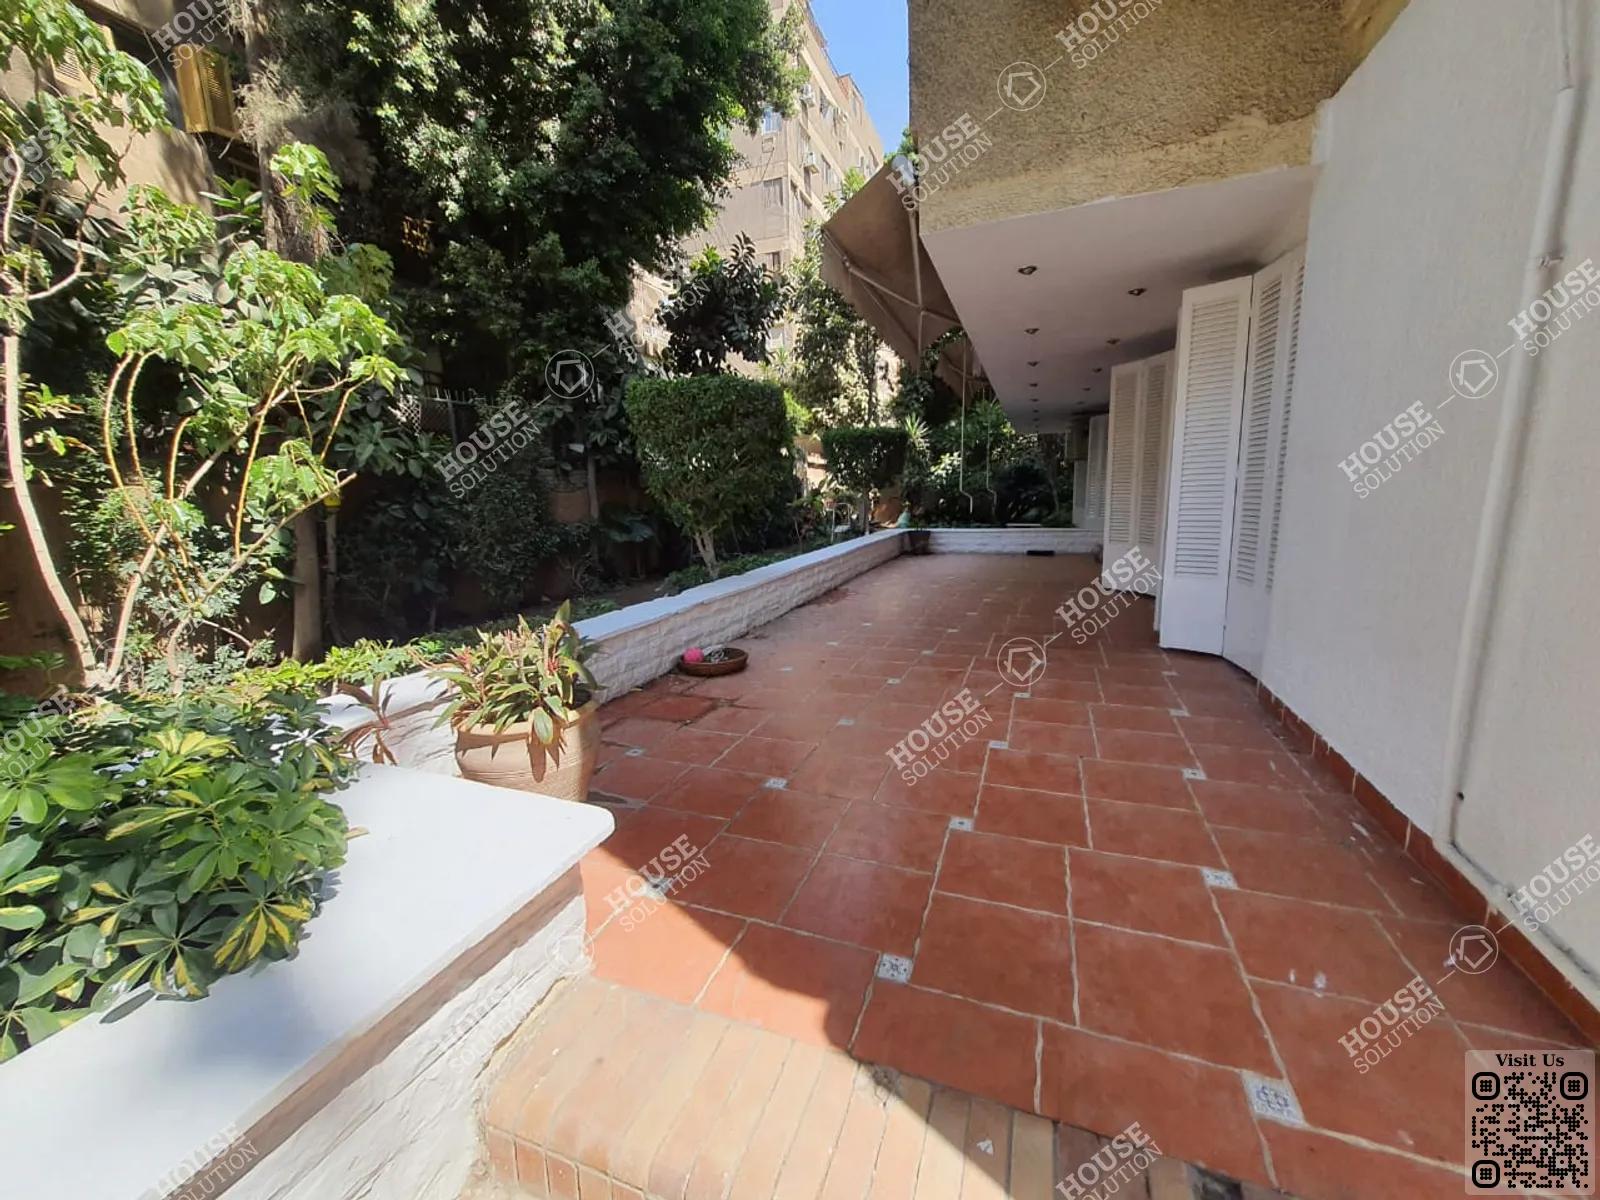 PRIVATE GARDEN  @ Ground Floors For Rent In Maadi Maadi Sarayat Area: 350 m² consists of 5 Bedrooms 4 Bathrooms Semi furnished 5 stars #3105-0